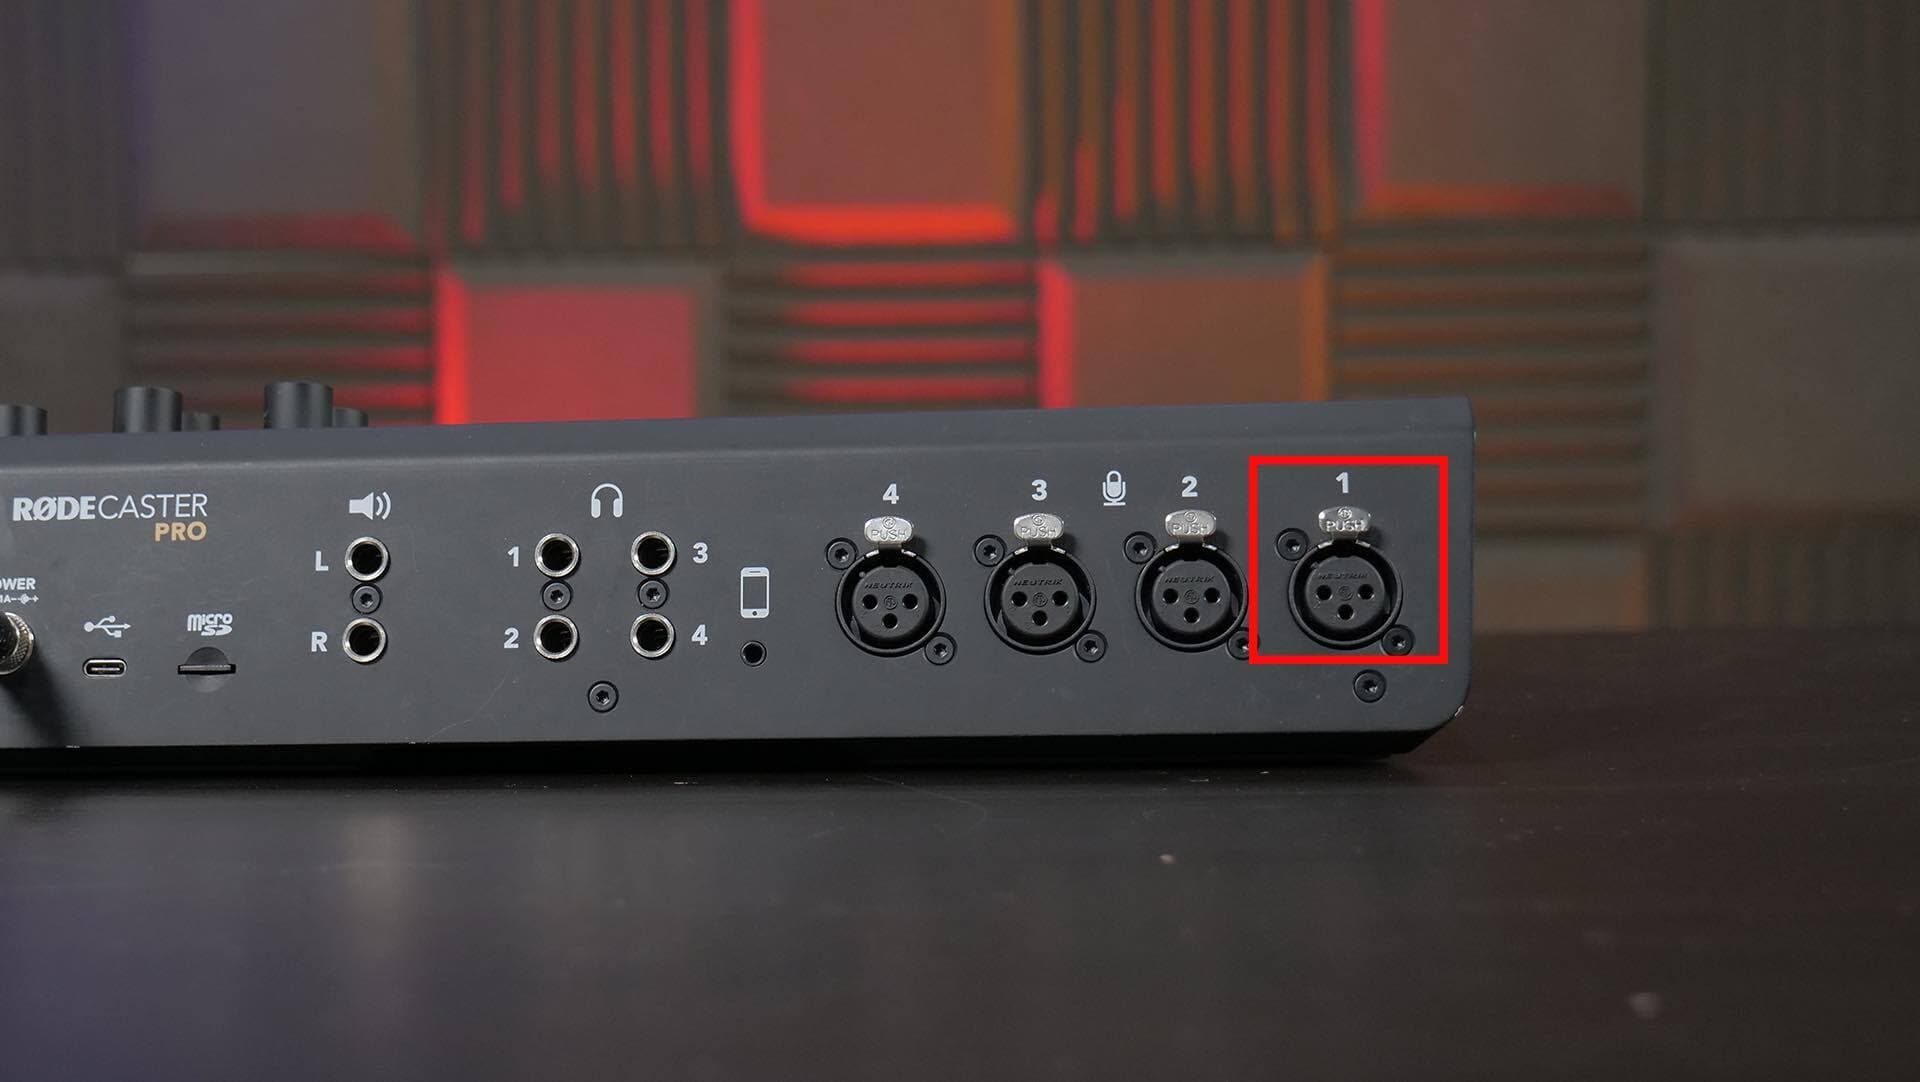 How to Broadcast Live Radio with the Rodecaster Pro XLR Inputs